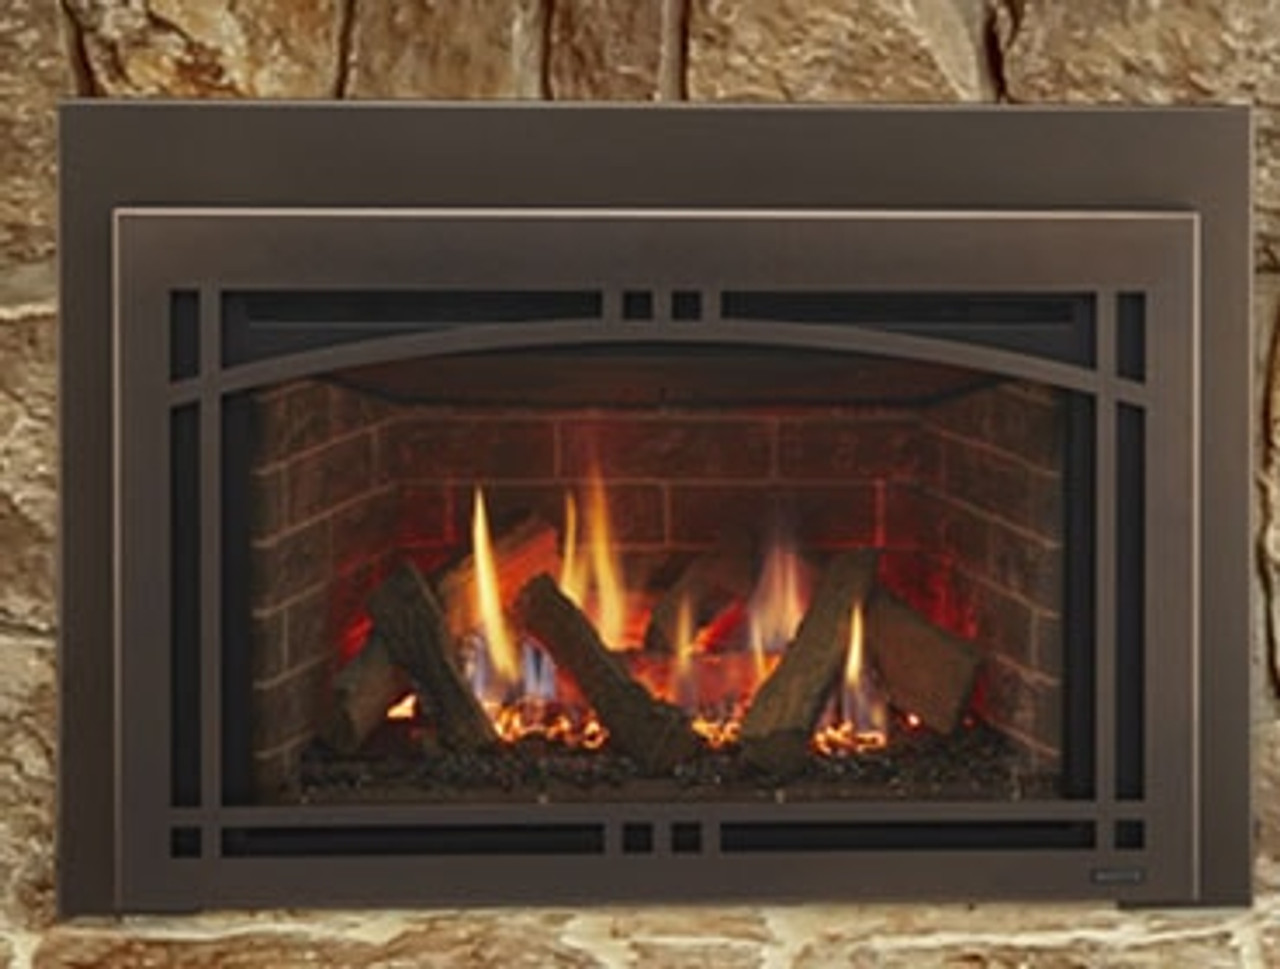 Majestic 25 Ruby Direct Vent GAS Fireplace Insert - Natural GAS